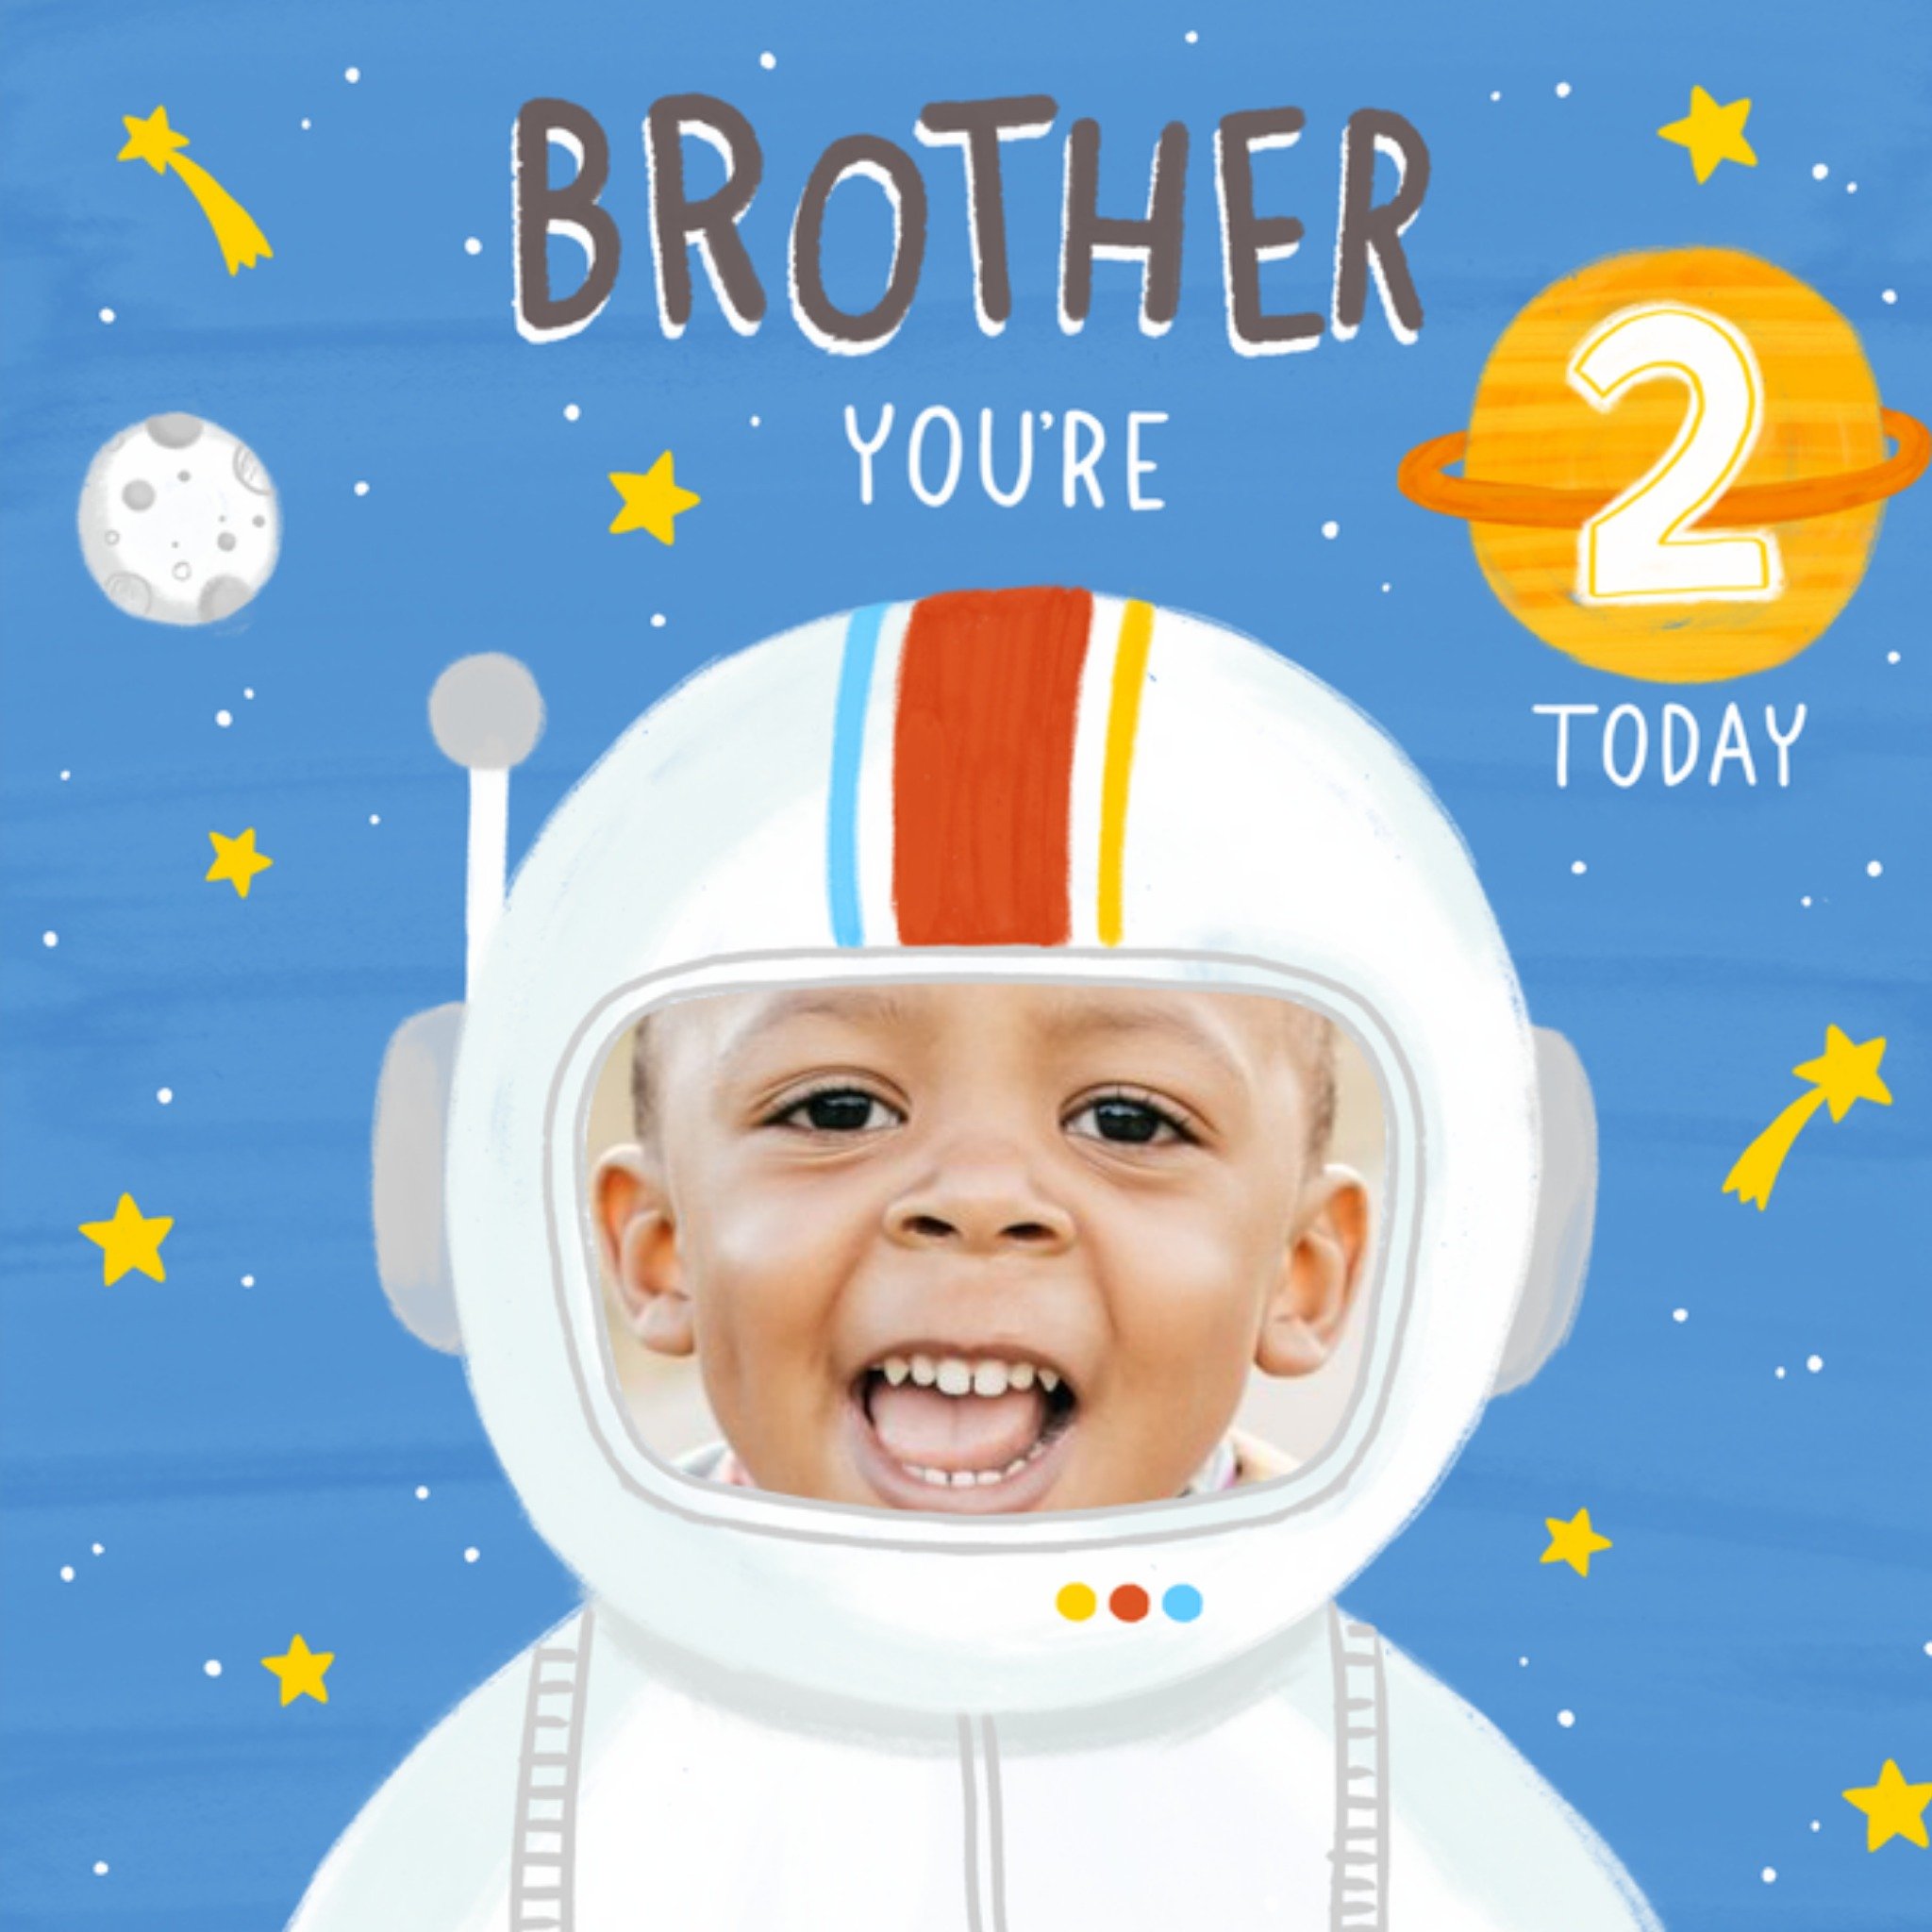 Moonpig Cute Brother Space Photo Upload 2 Today Birthday Card, Large